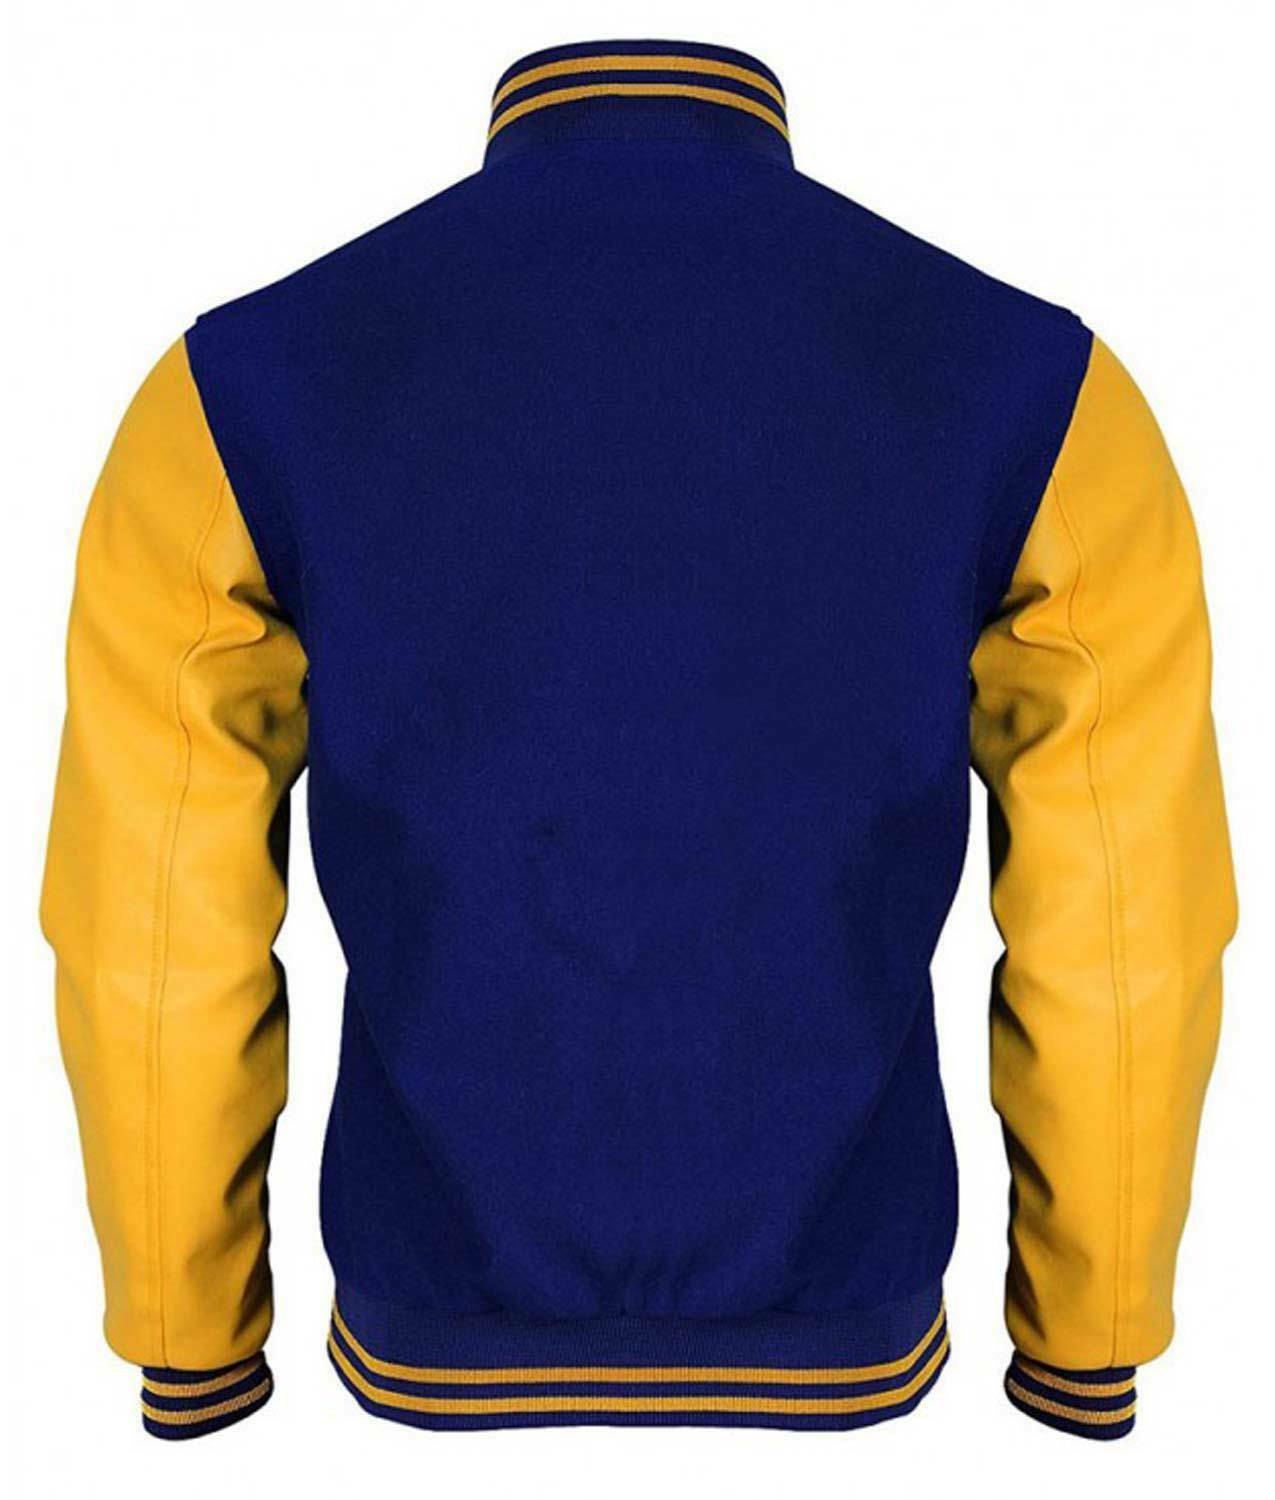 Spine Spark Riverdale Royal Blue Wool Varsity Jacket Gold Yellow Leather Sleeves